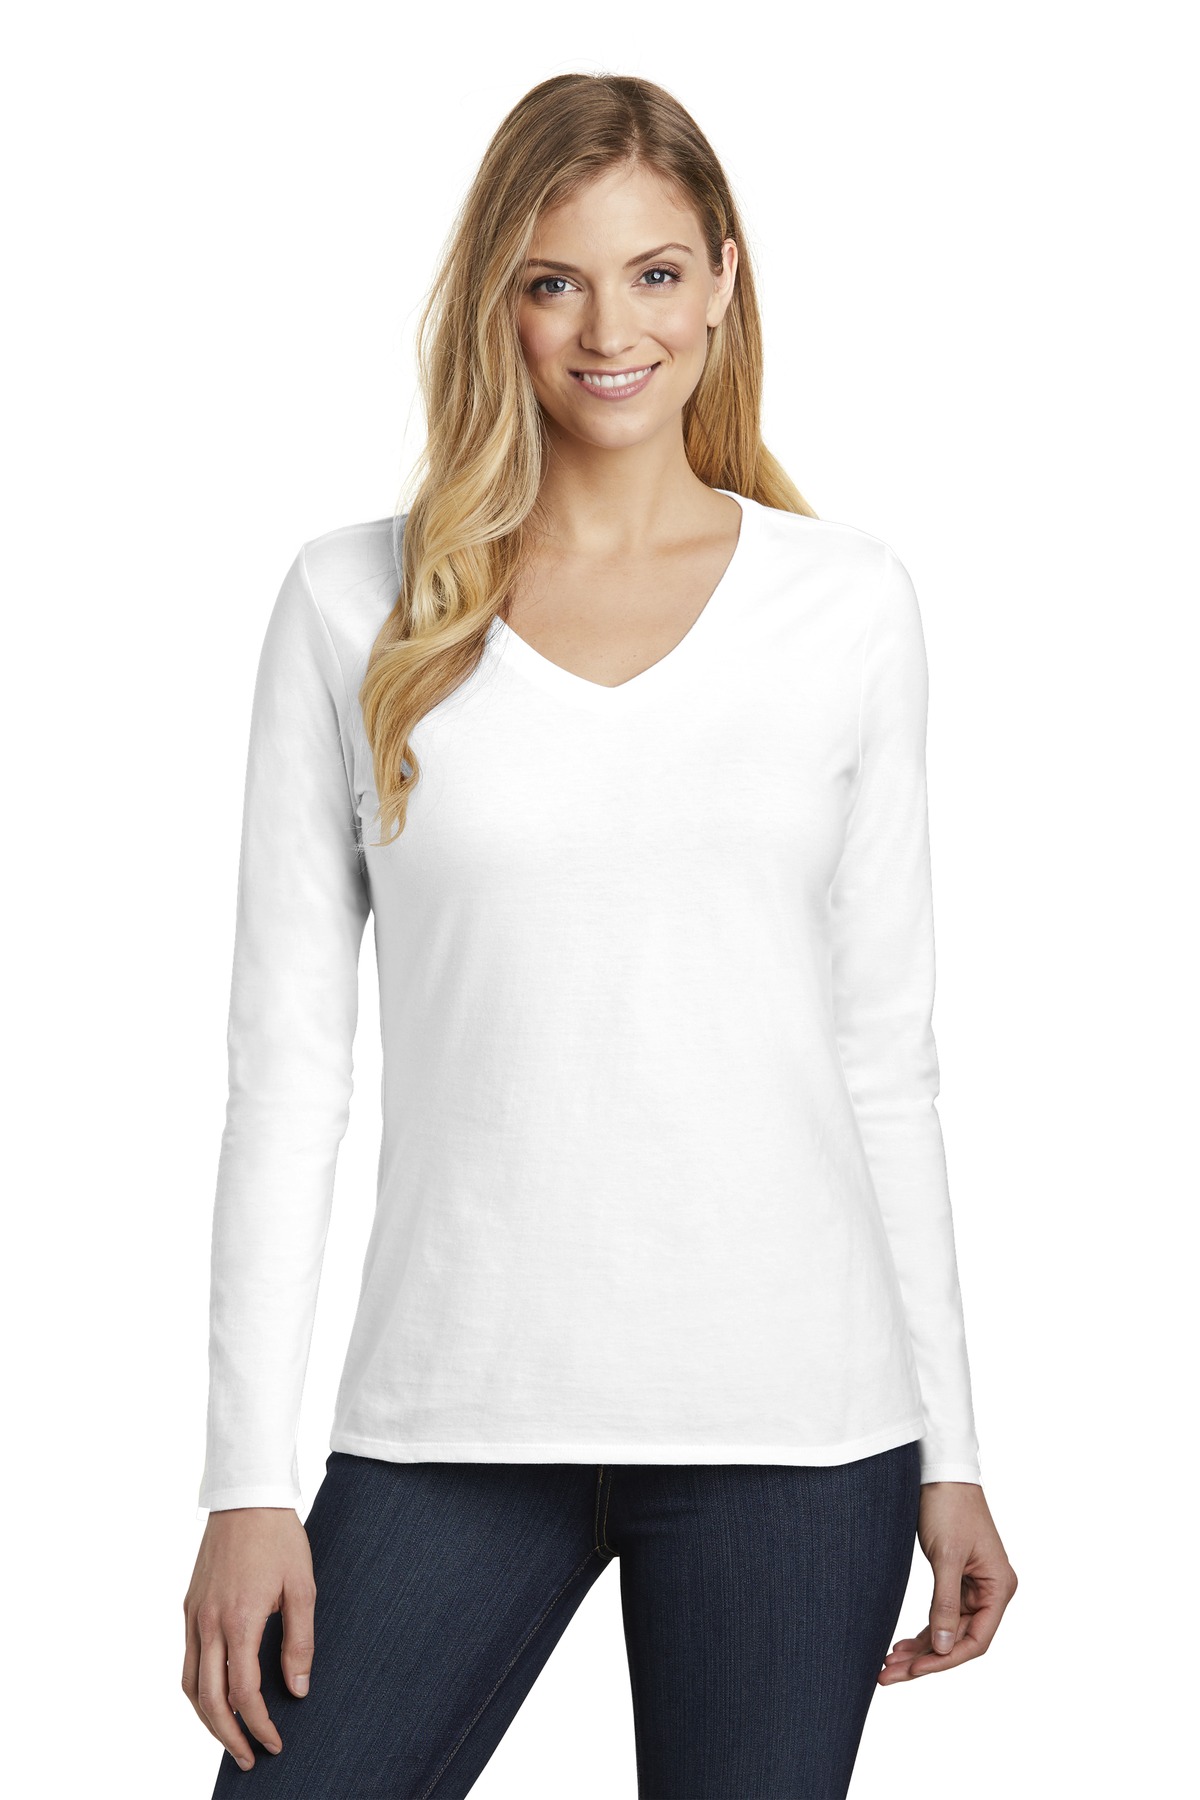 District Women&#8216;s Very Important Tee Long Sleeve V-Neck-District